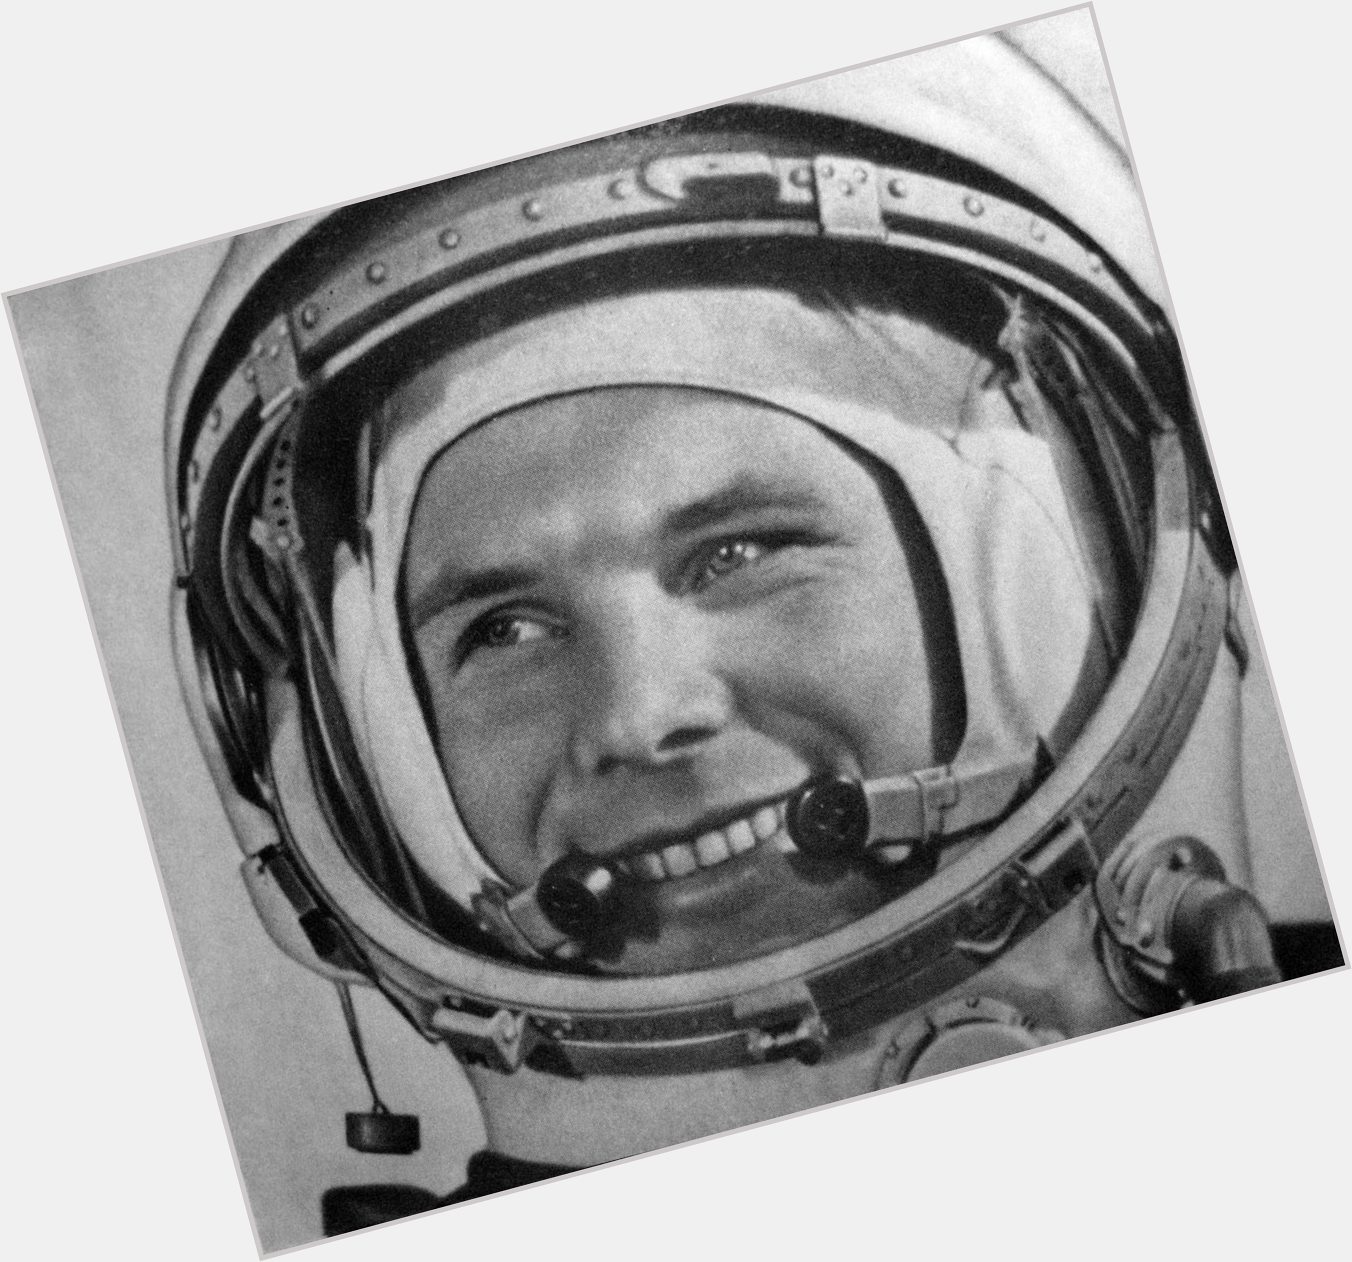 Today in Geek History: Yuri Gagarin, first human to journey into outer space, was born in 1934. Happy Birthday, Yuri! 